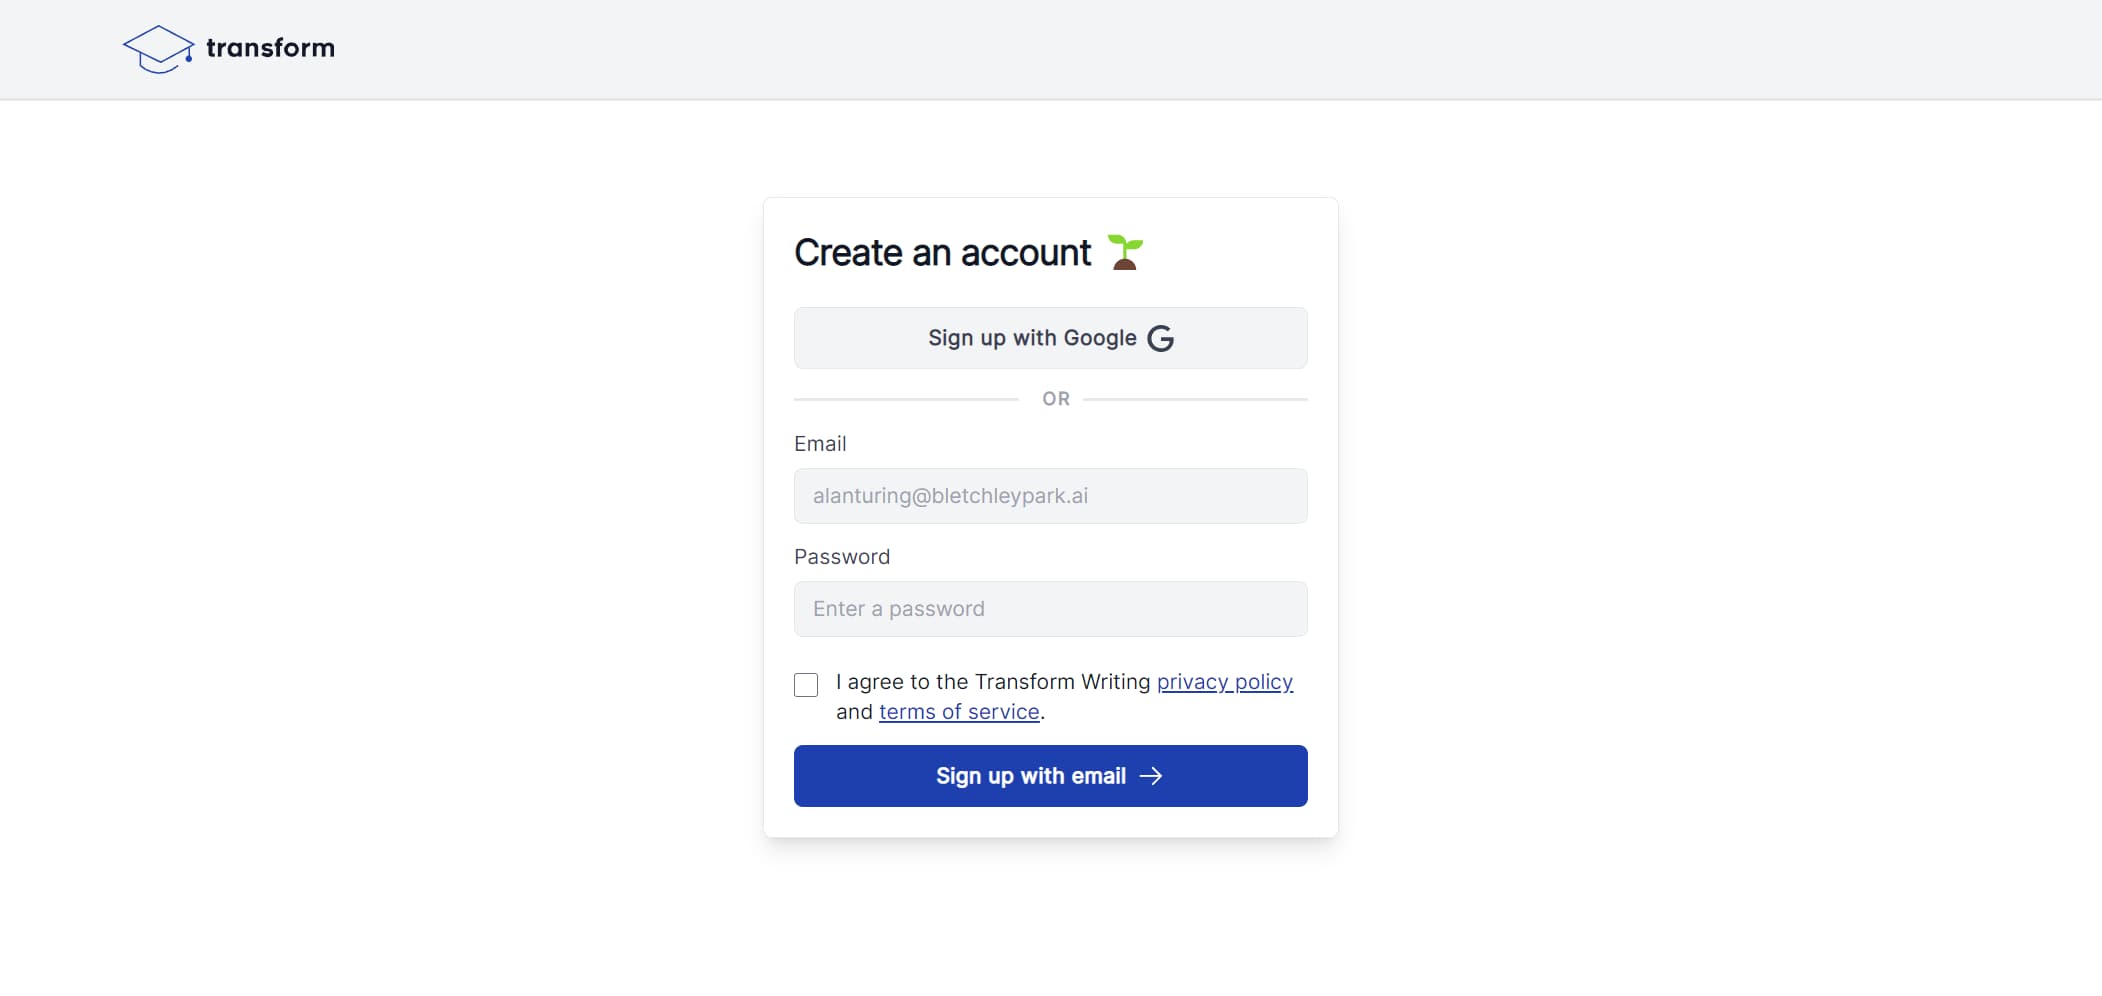 The sign up page